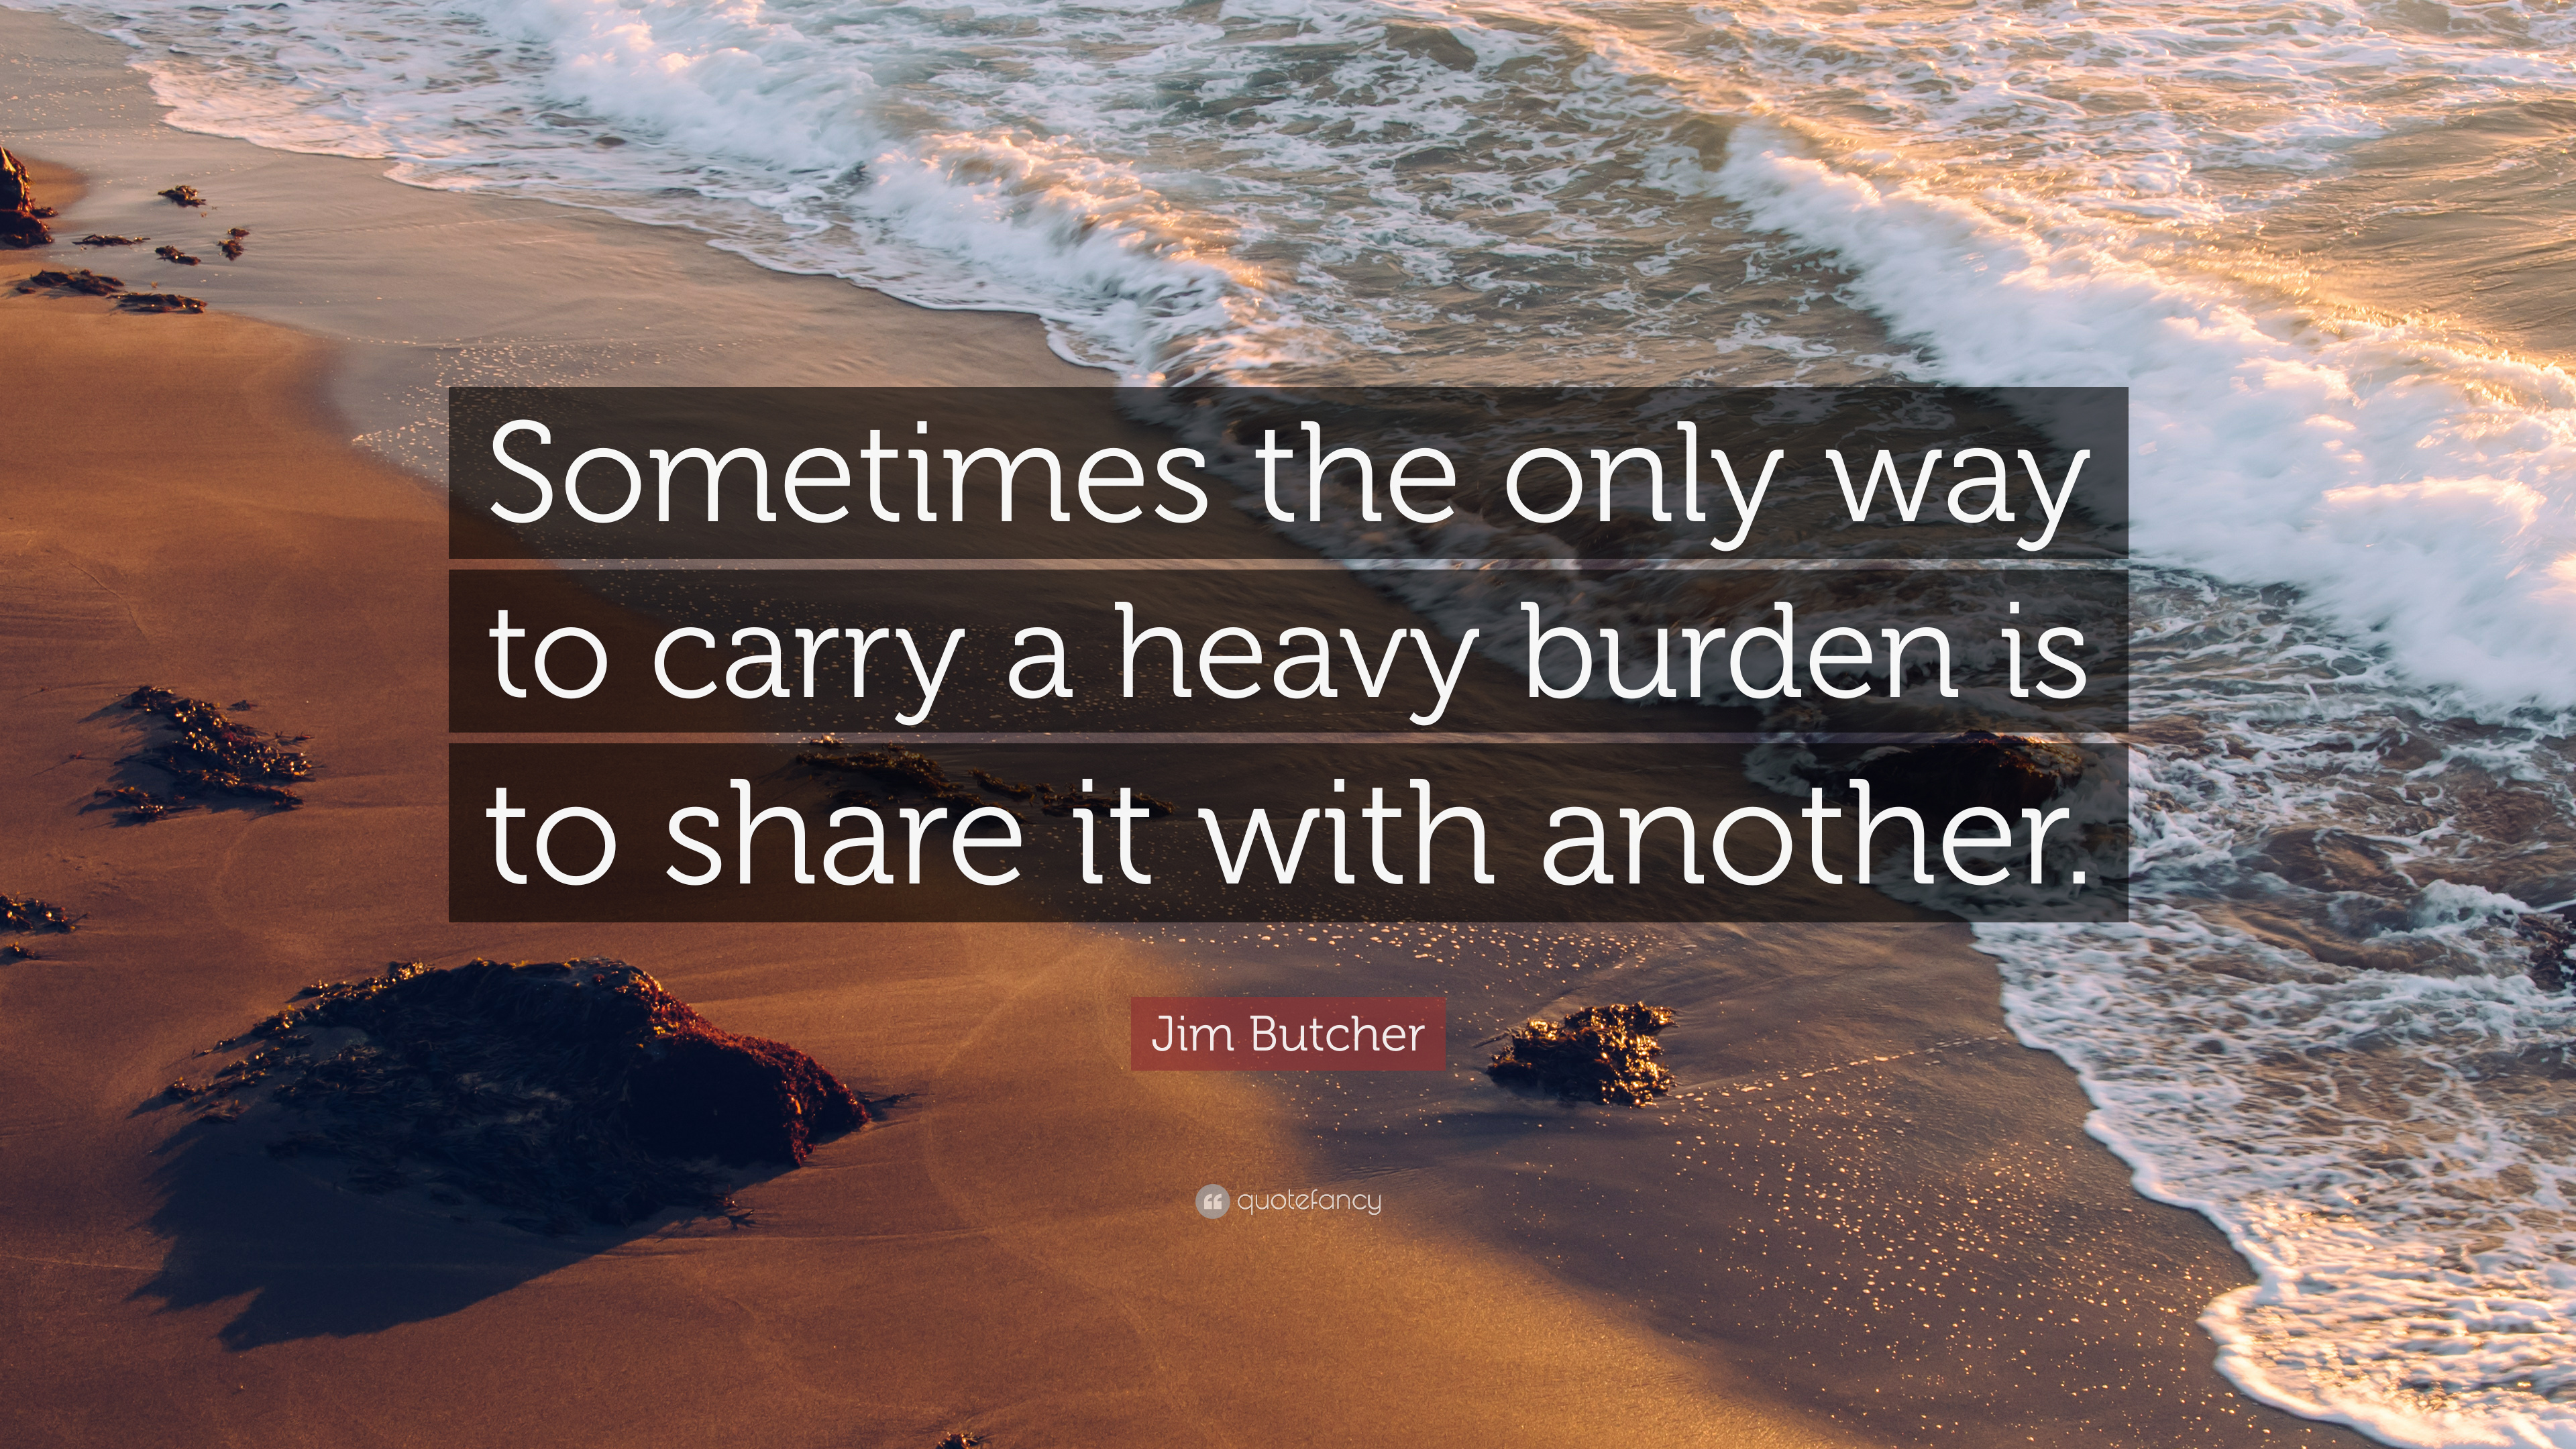 Jim Butcher Quote: “Sometimes the only way to carry a heavy burden ...